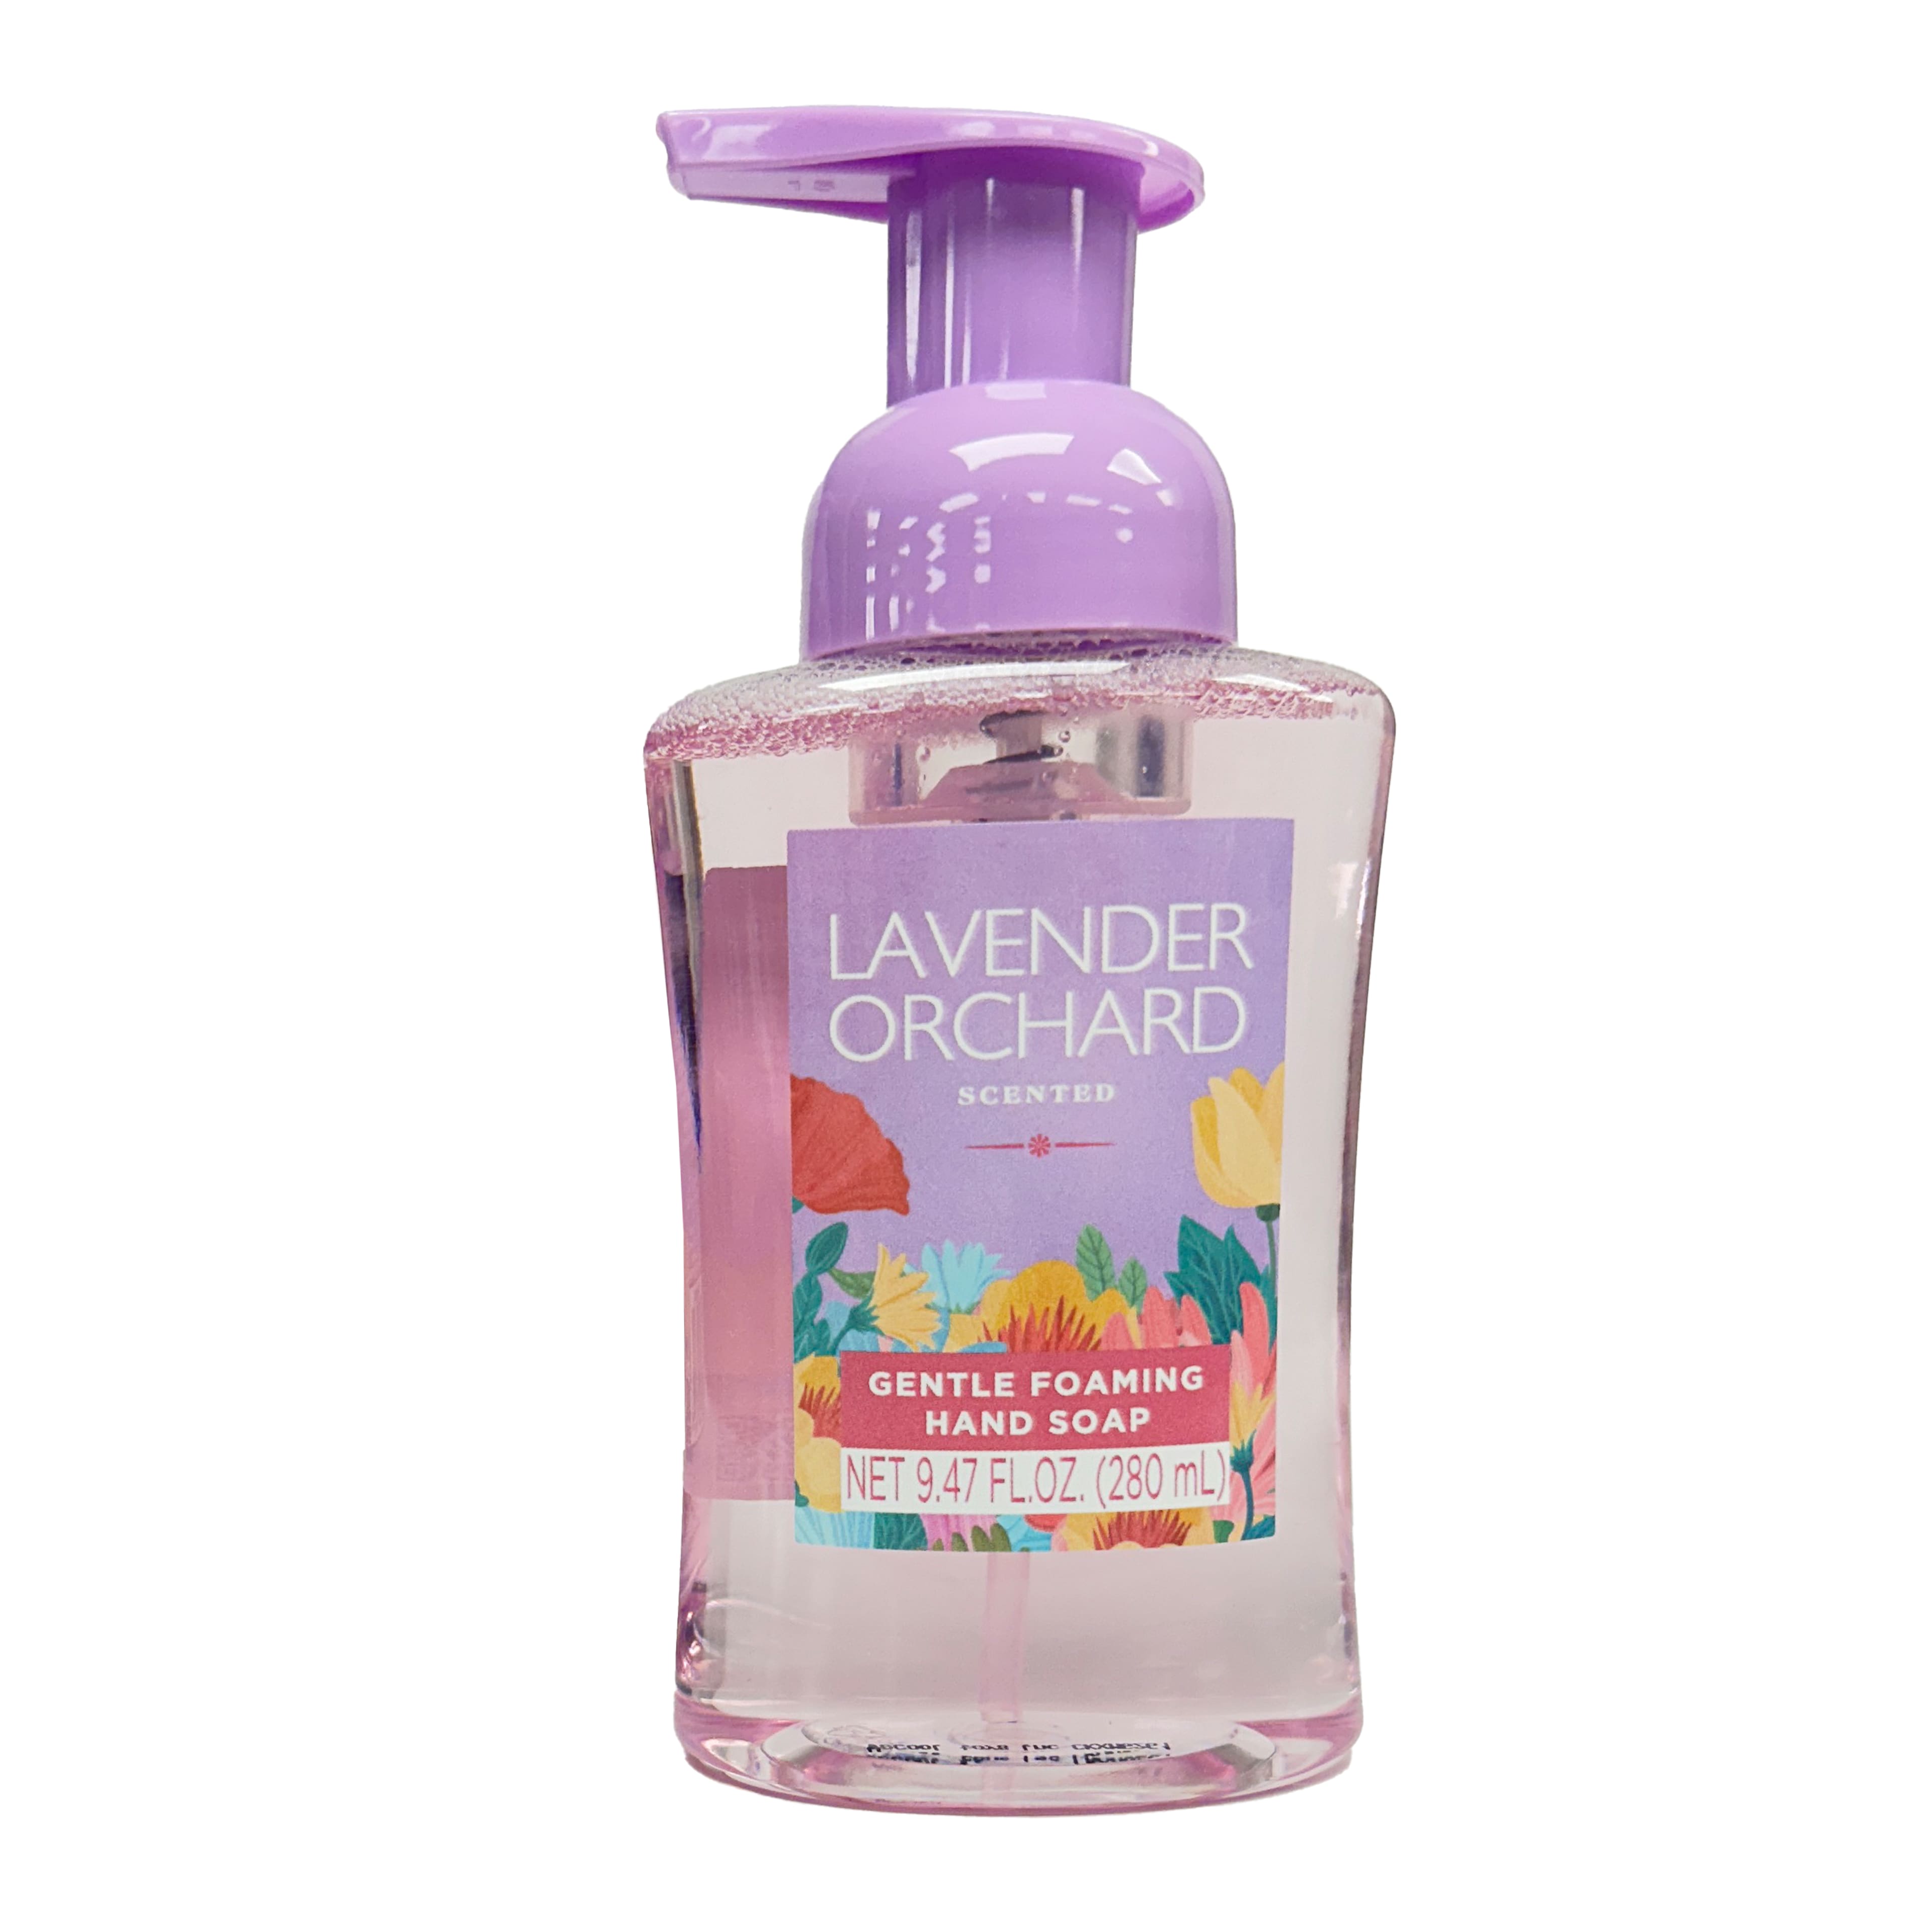 Lavender Orchard Scented Gentle Foaming Hand Soap